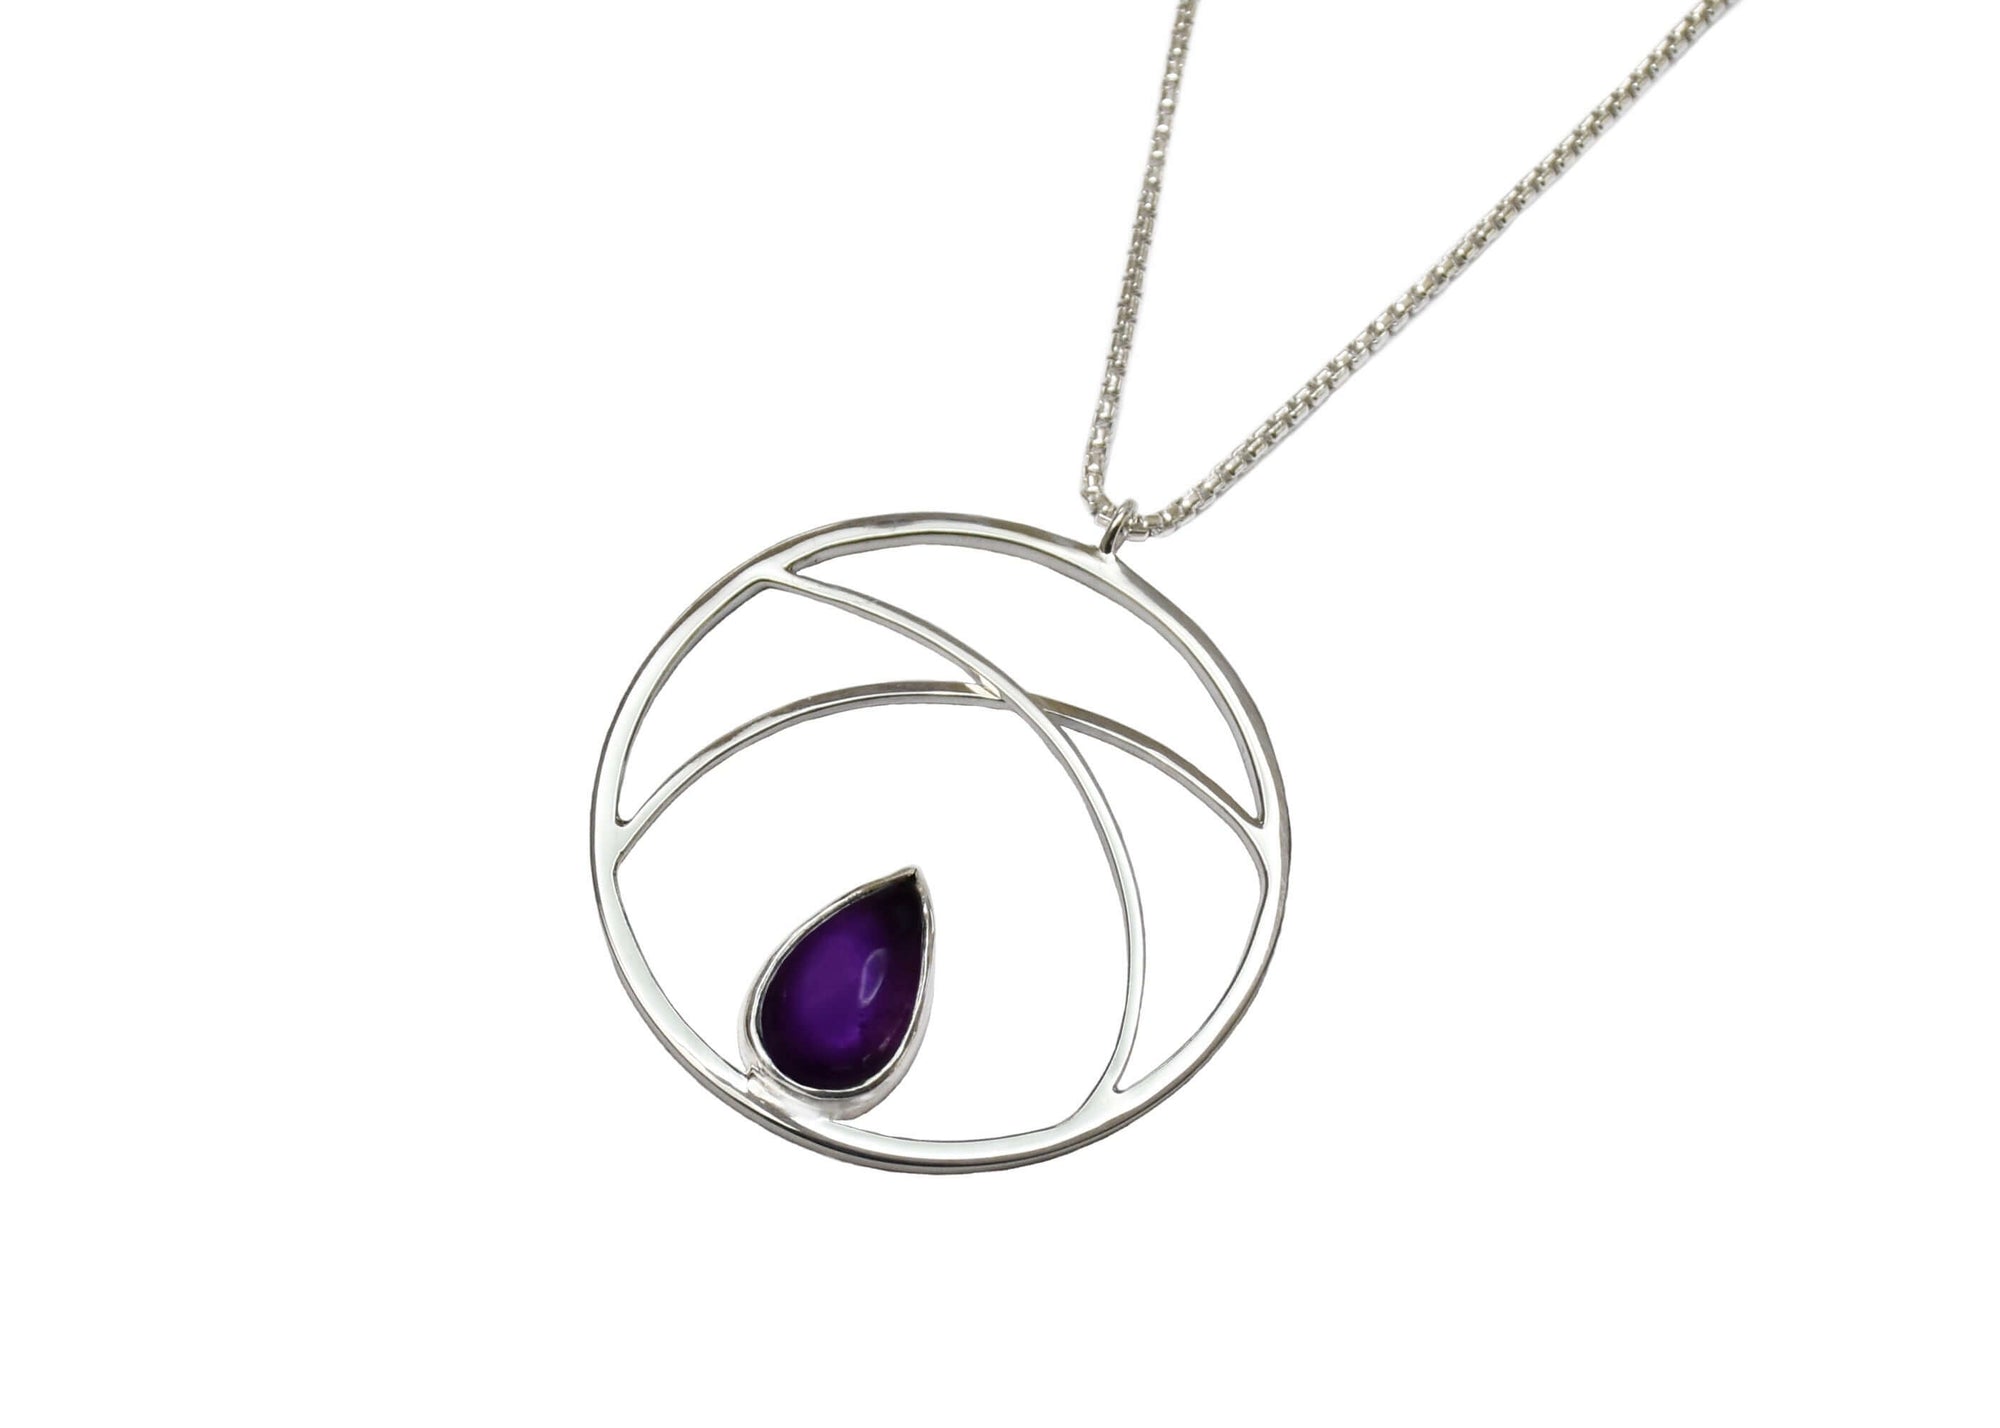 A handmade sterling silver circle pendant necklace with amethyst